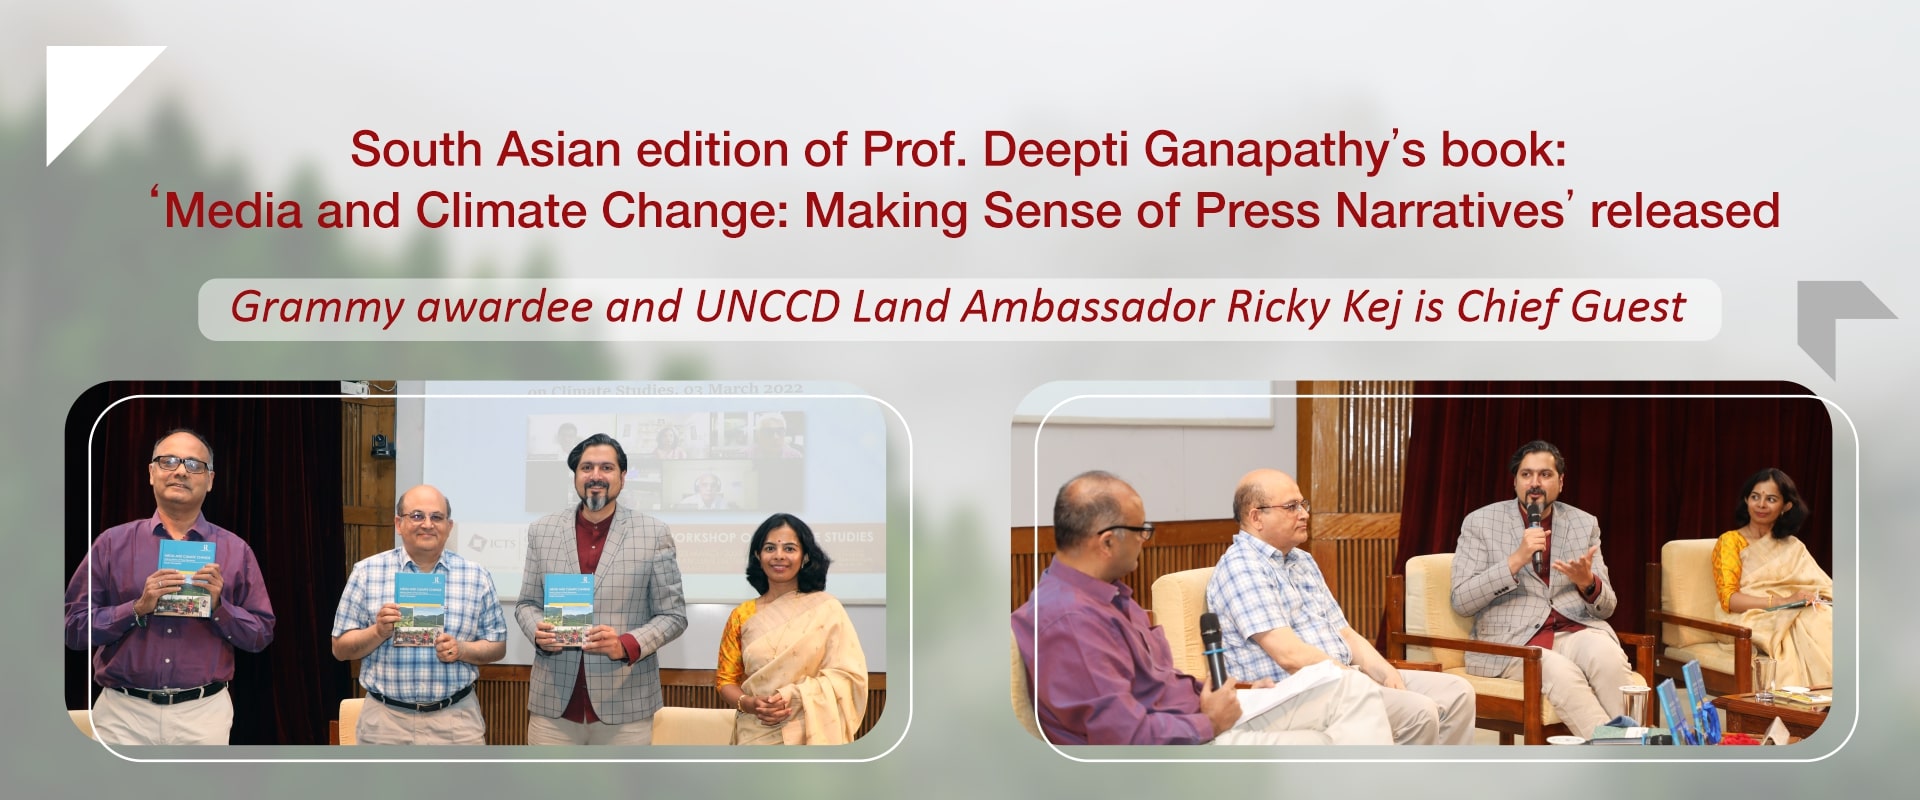 Prof. Deepti Ganapathy’s book: ‘Media and Climate Change: Making Sense of Press Narratives’ released